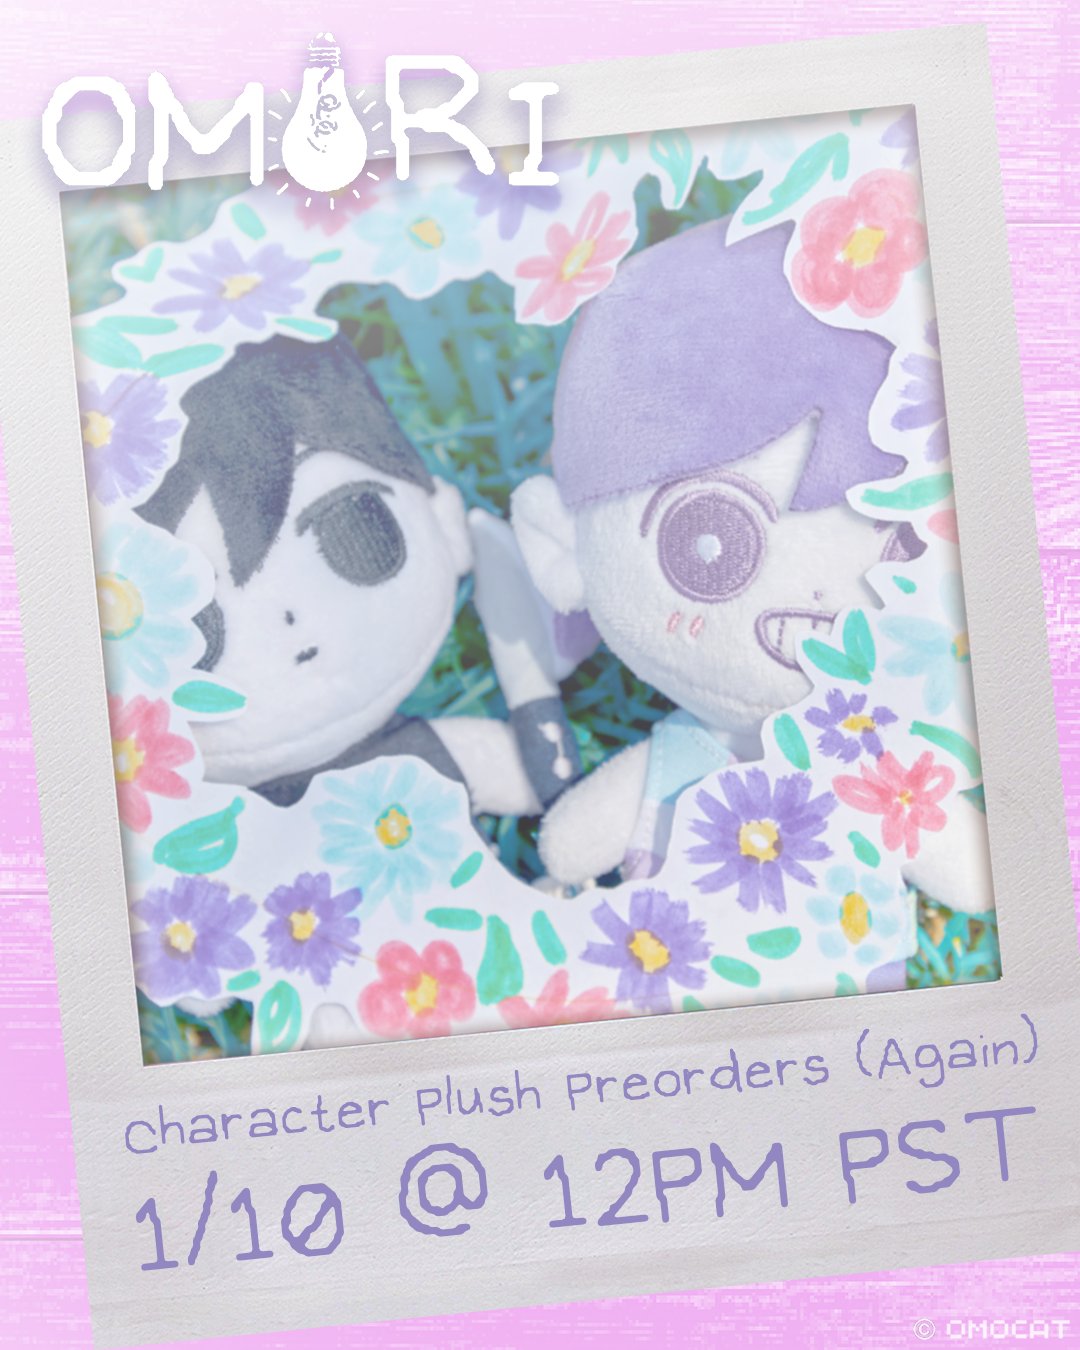 OMOCAT on X: due to the popularity of the OMORI character plushies,  preorders will open again on 1/10 at 12PM PST and will close on 1/18 at  12AM PST. the first round